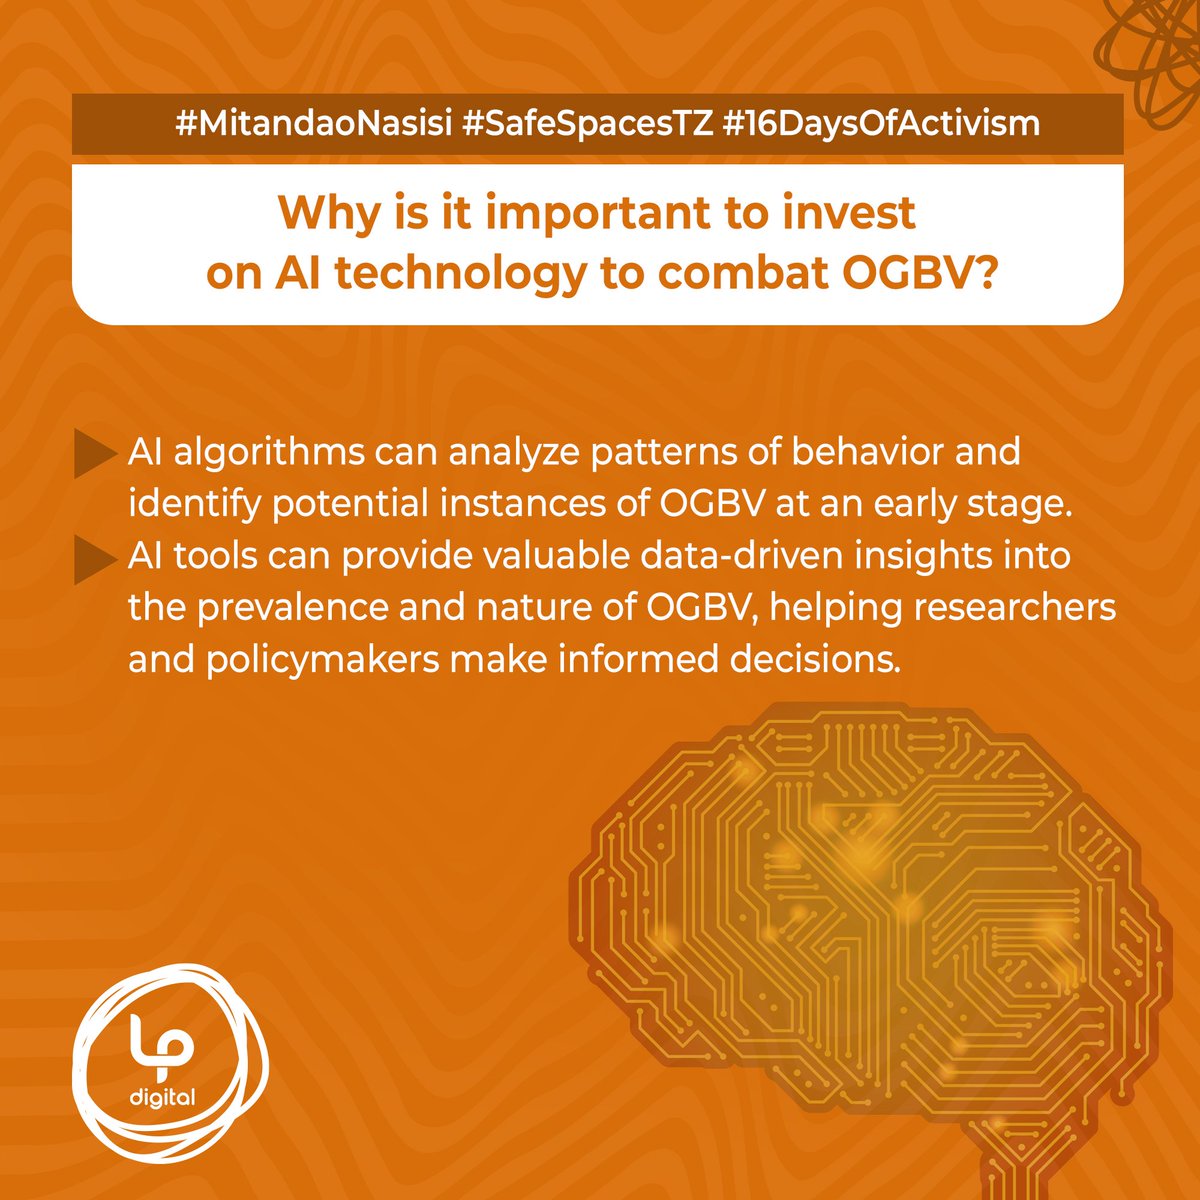 Let us take a stand against OGBV! Investing in AI technology enables early detection through behavior analysis and provides crucial data-driven insights for informed decisions. 

It's time to act.

#16DaysOfActivism #OnlineSafety #SafeSpacesTZ #MitandaoNaSisi #EndOGBV